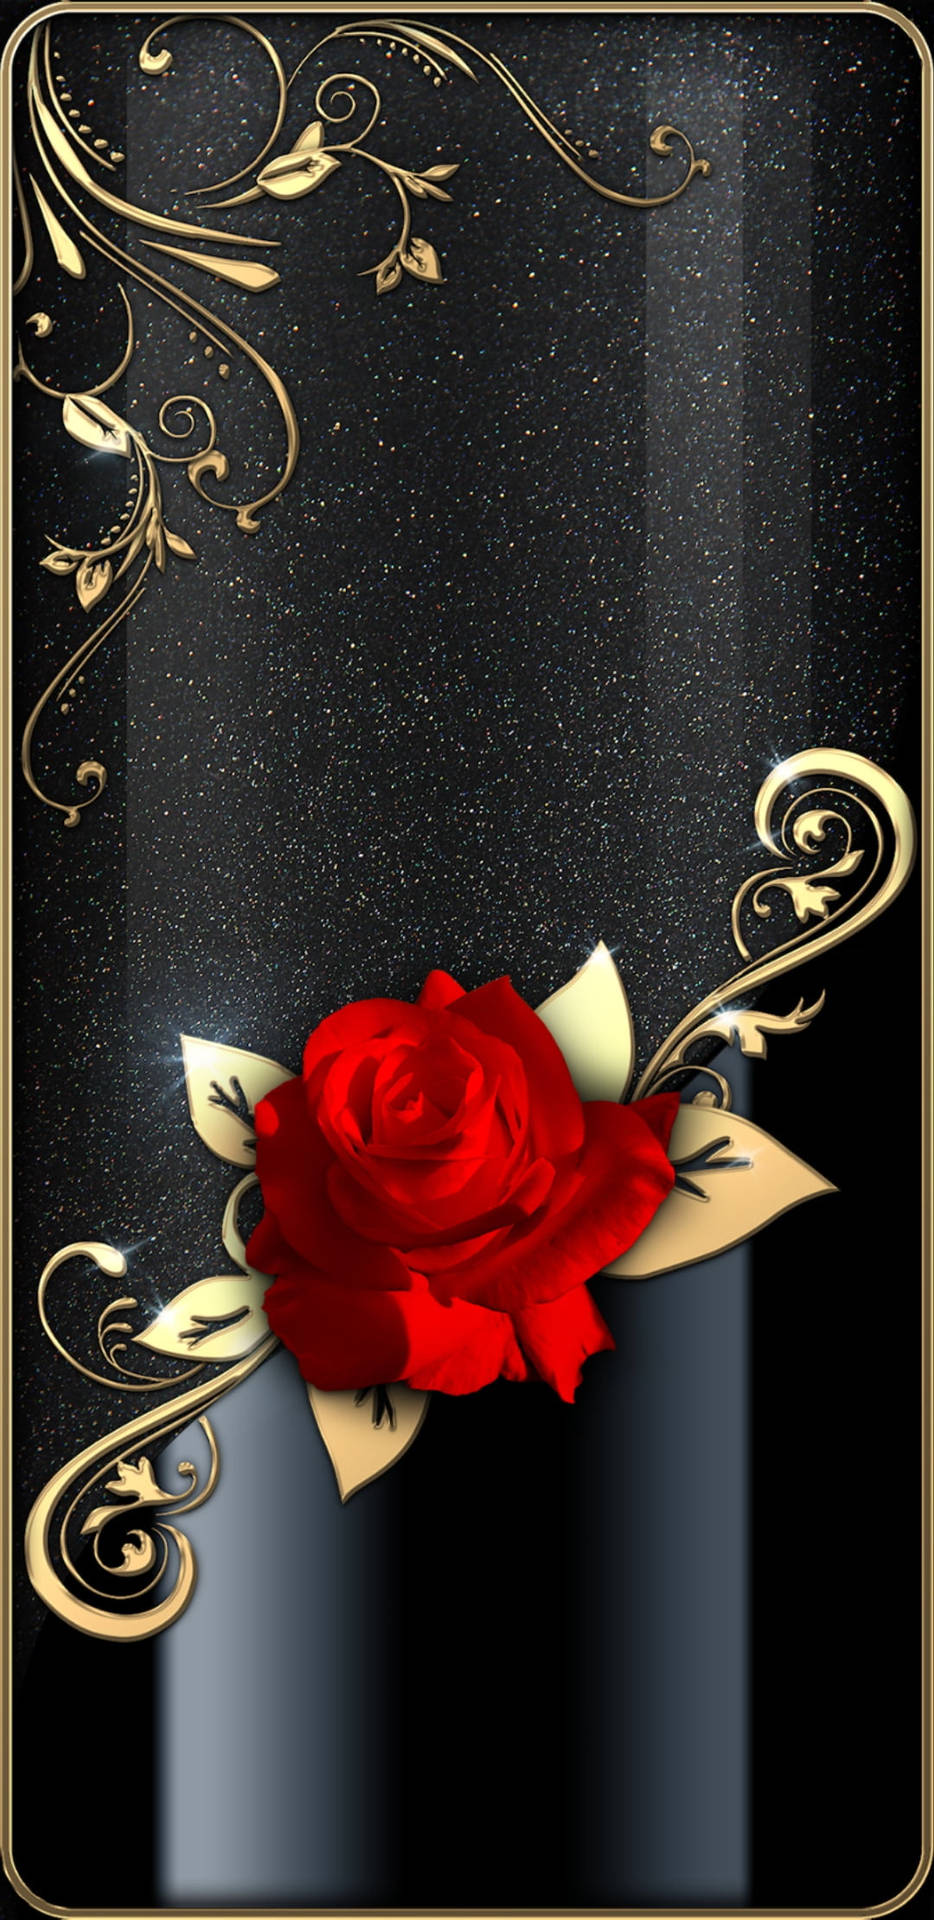 Caption: Elegant Black and Gold iPhone adorned with a Stunning Red Rose Wallpaper